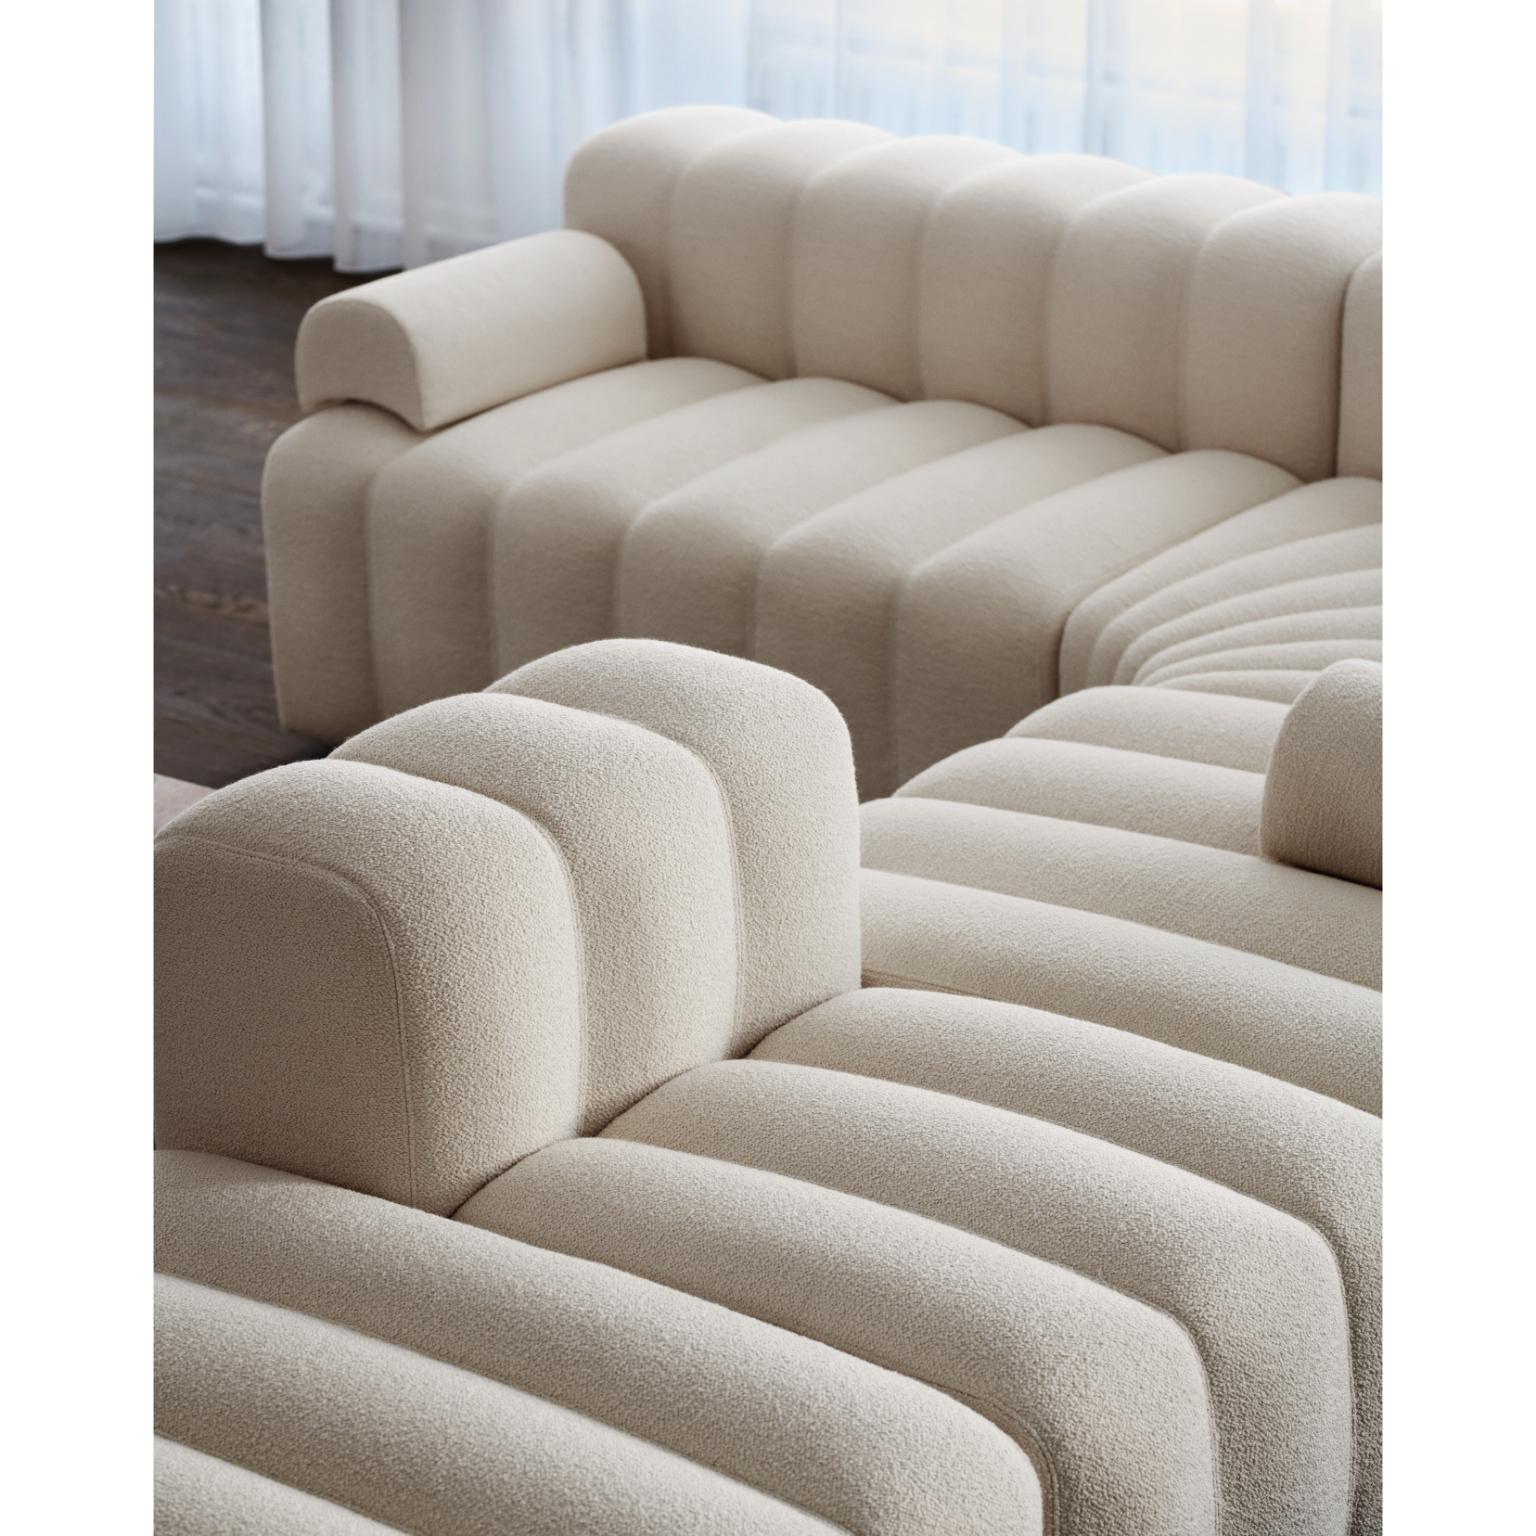 Studio Lounge Large Right Modular Sofa With Short Armrest by NORR11
Dimensions: D 130 x W 153 x H 70 cm. SH 47 cm. 
Materials: Foam, wood and upholstery.
Upholstery: Barnum Boucle Color 3.

Available in different upholstery options. A plywood